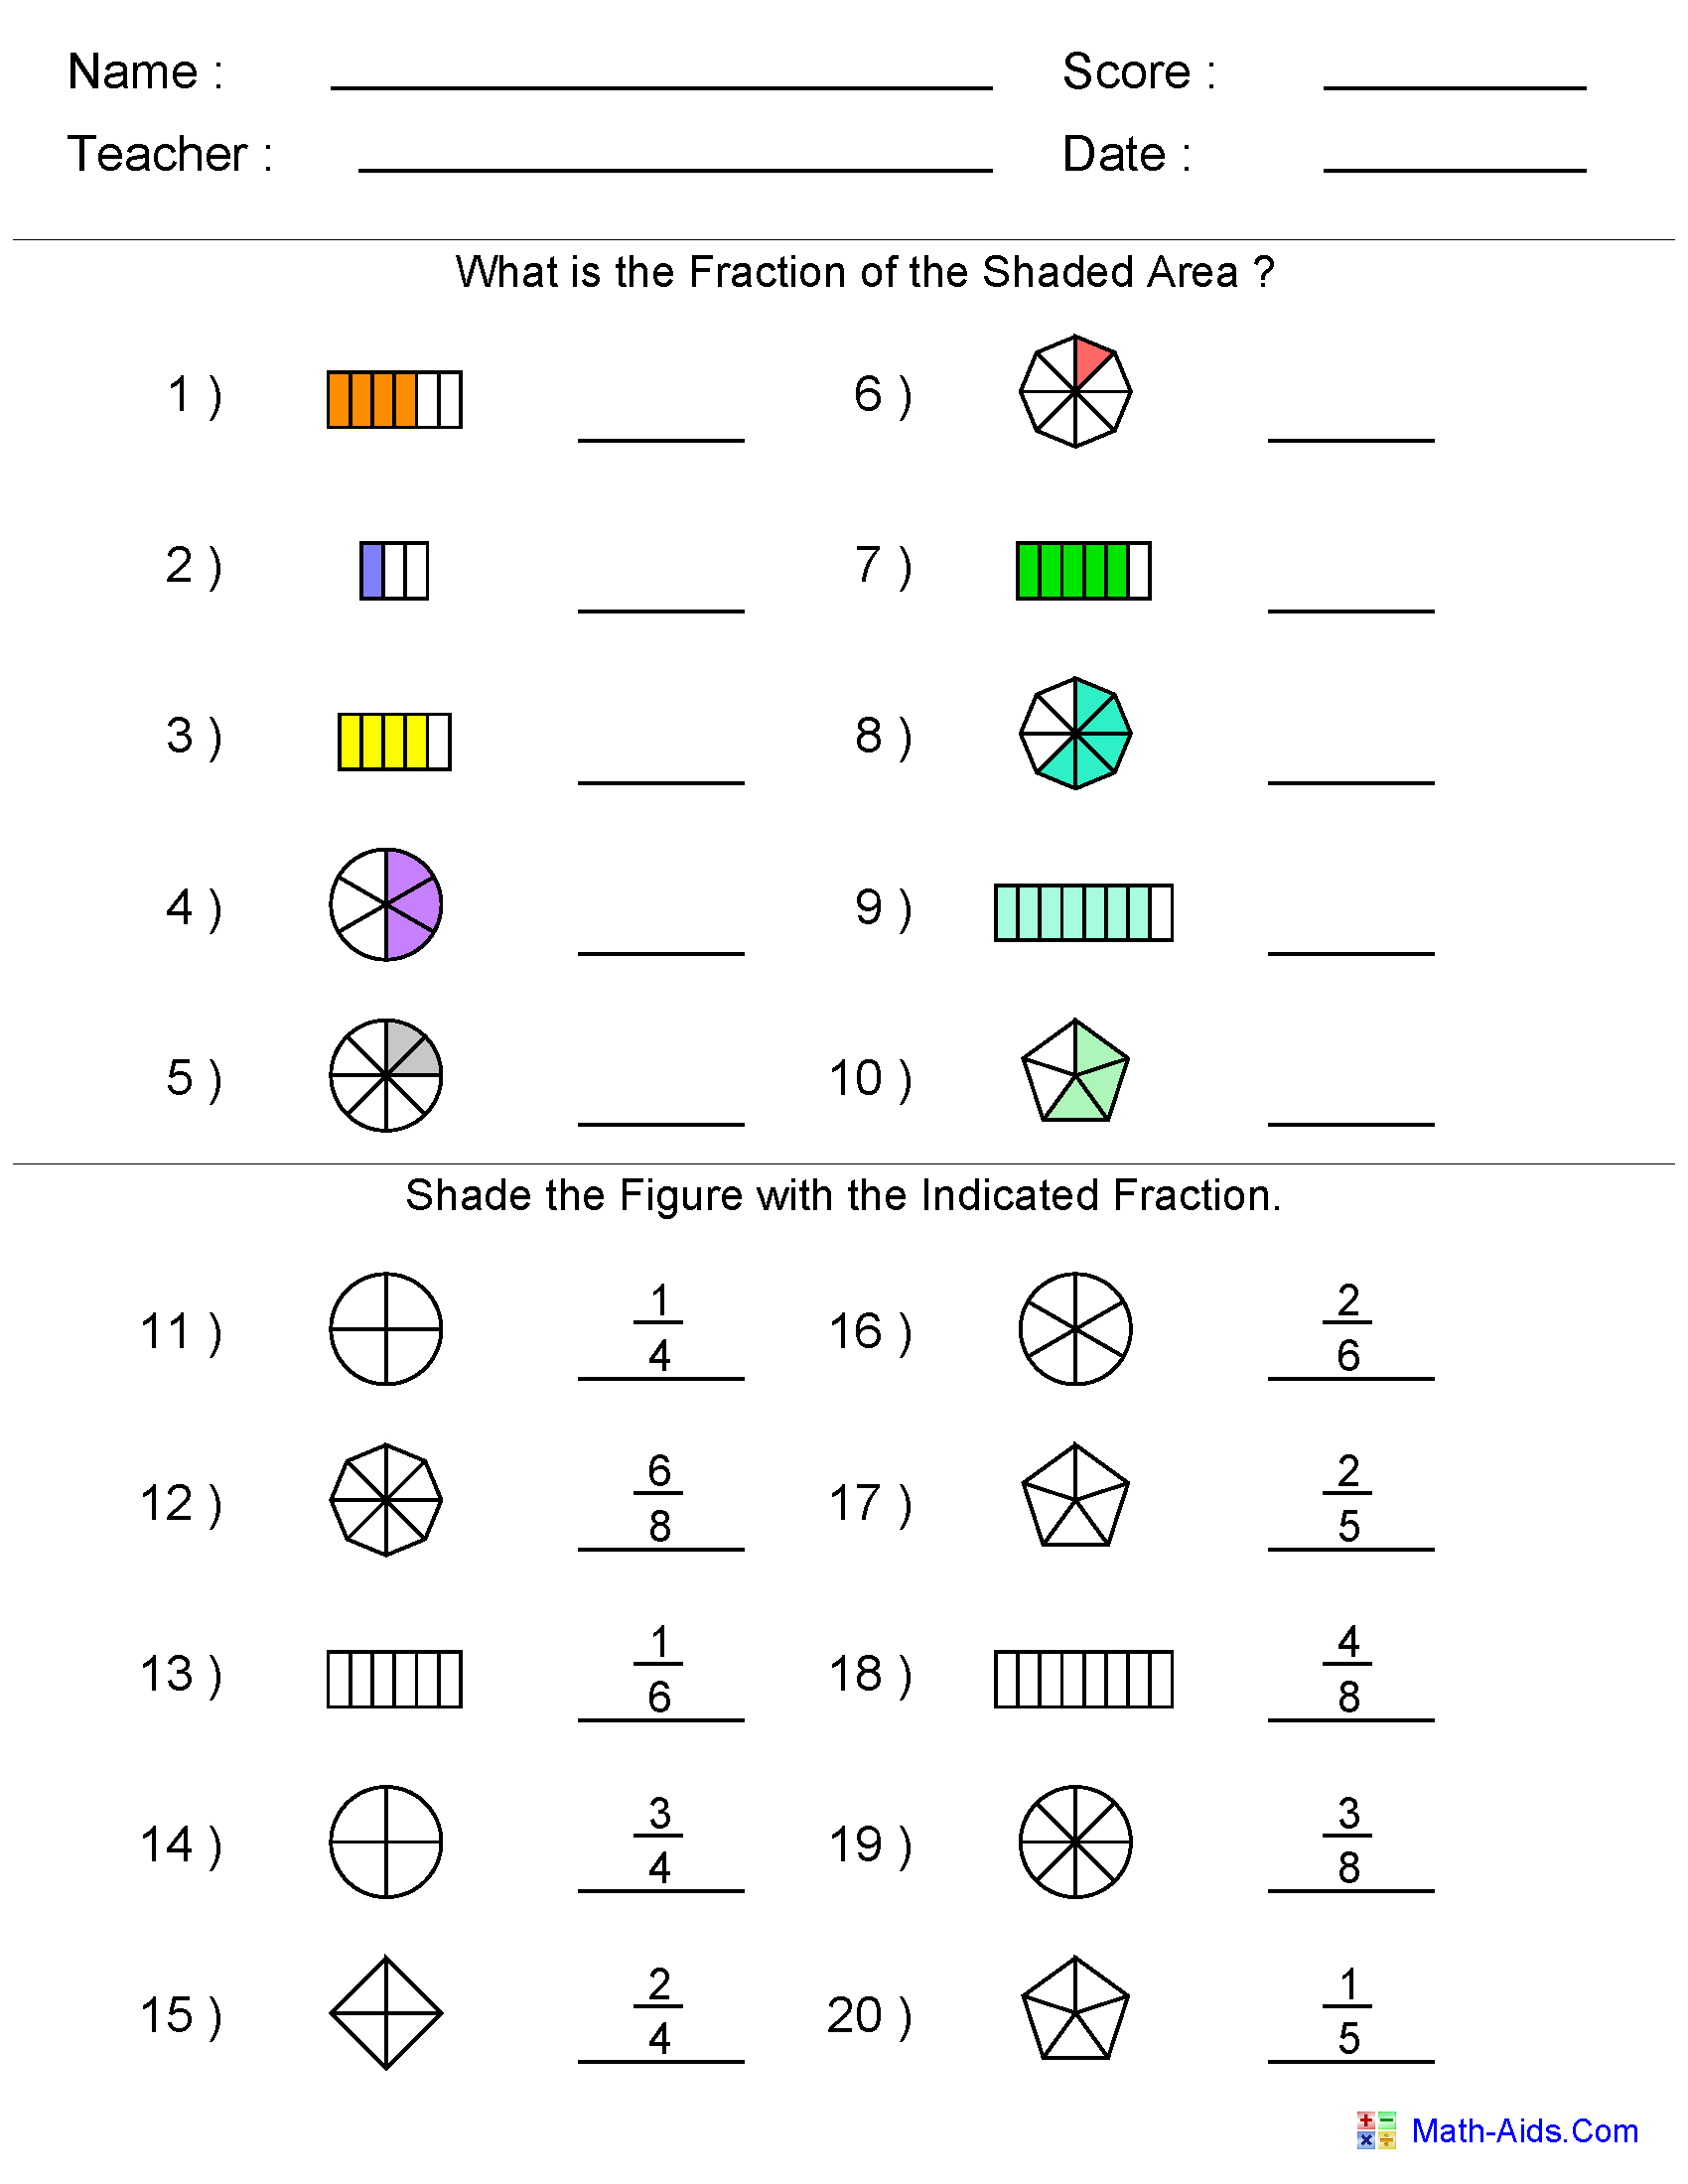 Fractions Worksheets | Printable Fractions Worksheets For Teachers - Free Printable Math Worksheets For 4Th Grade